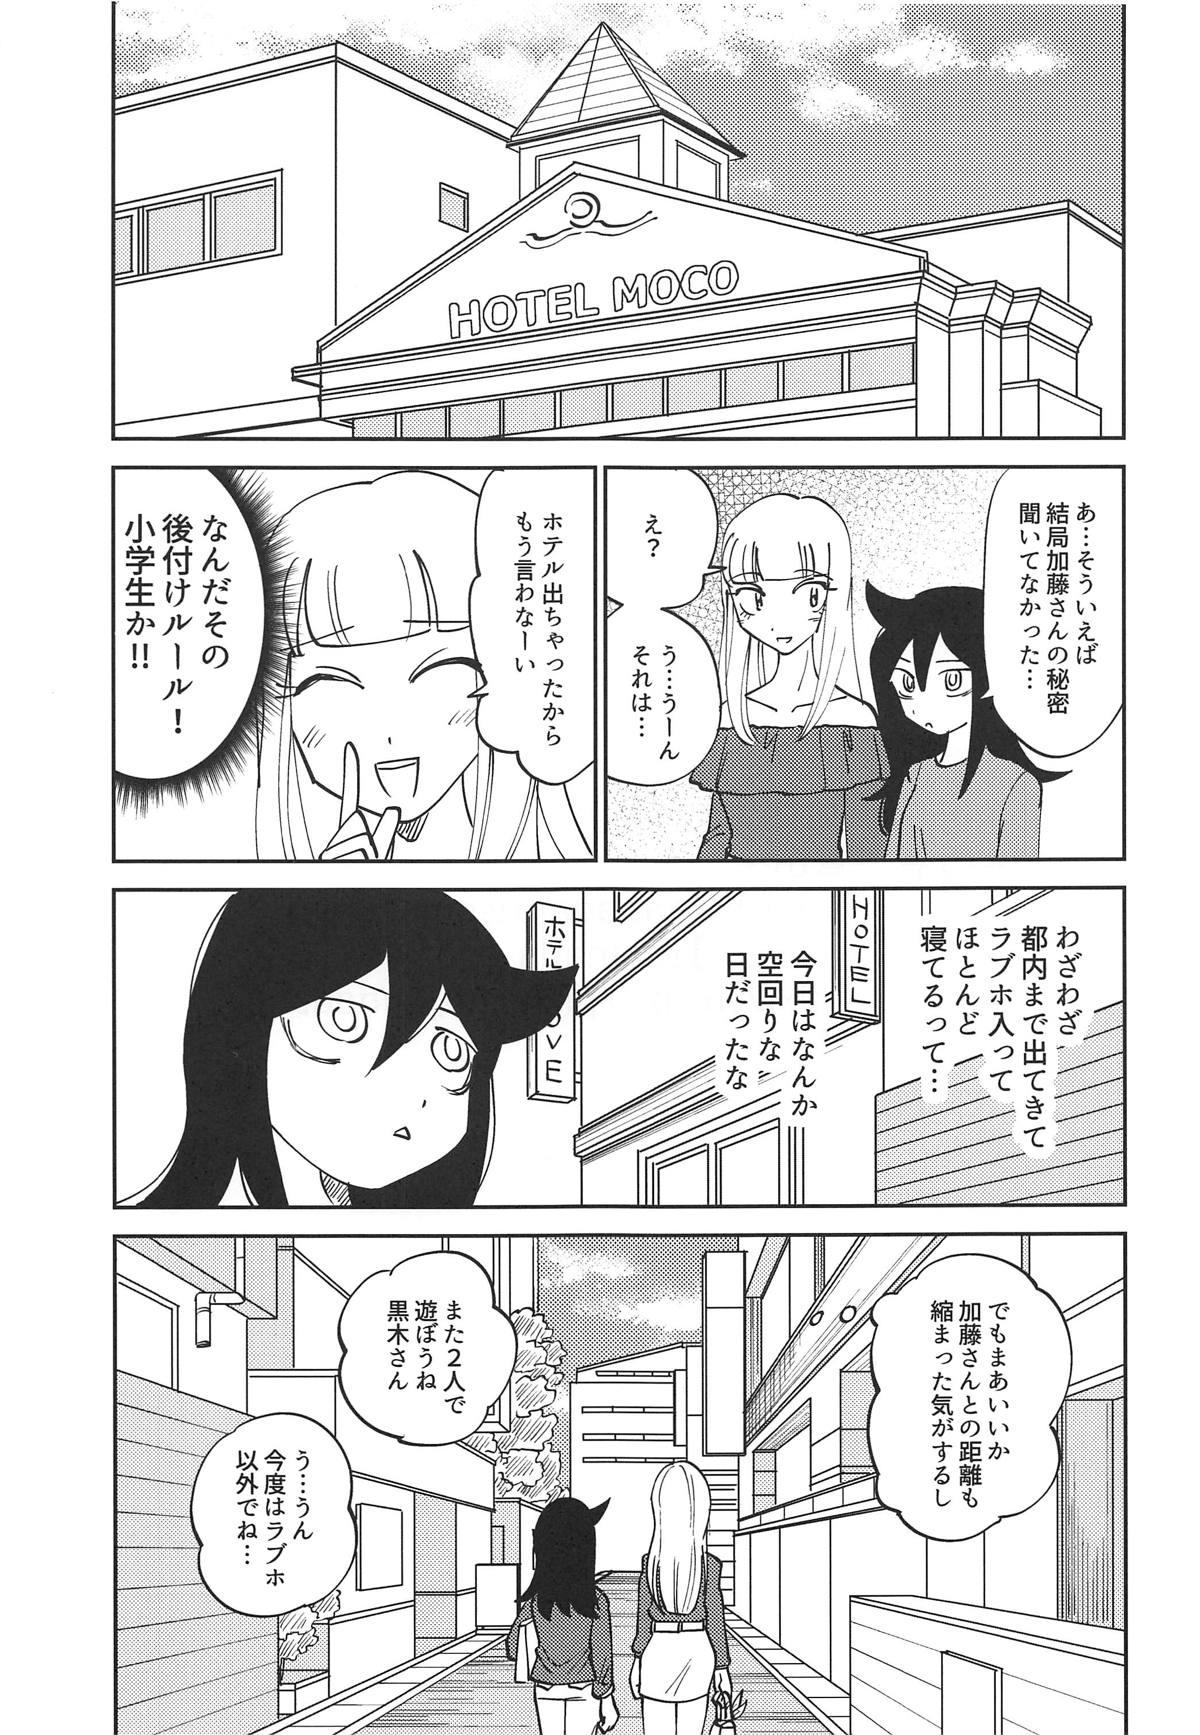 With Kuroki-san, Anone. - Its not my fault that im not popular Close Up - Page 26